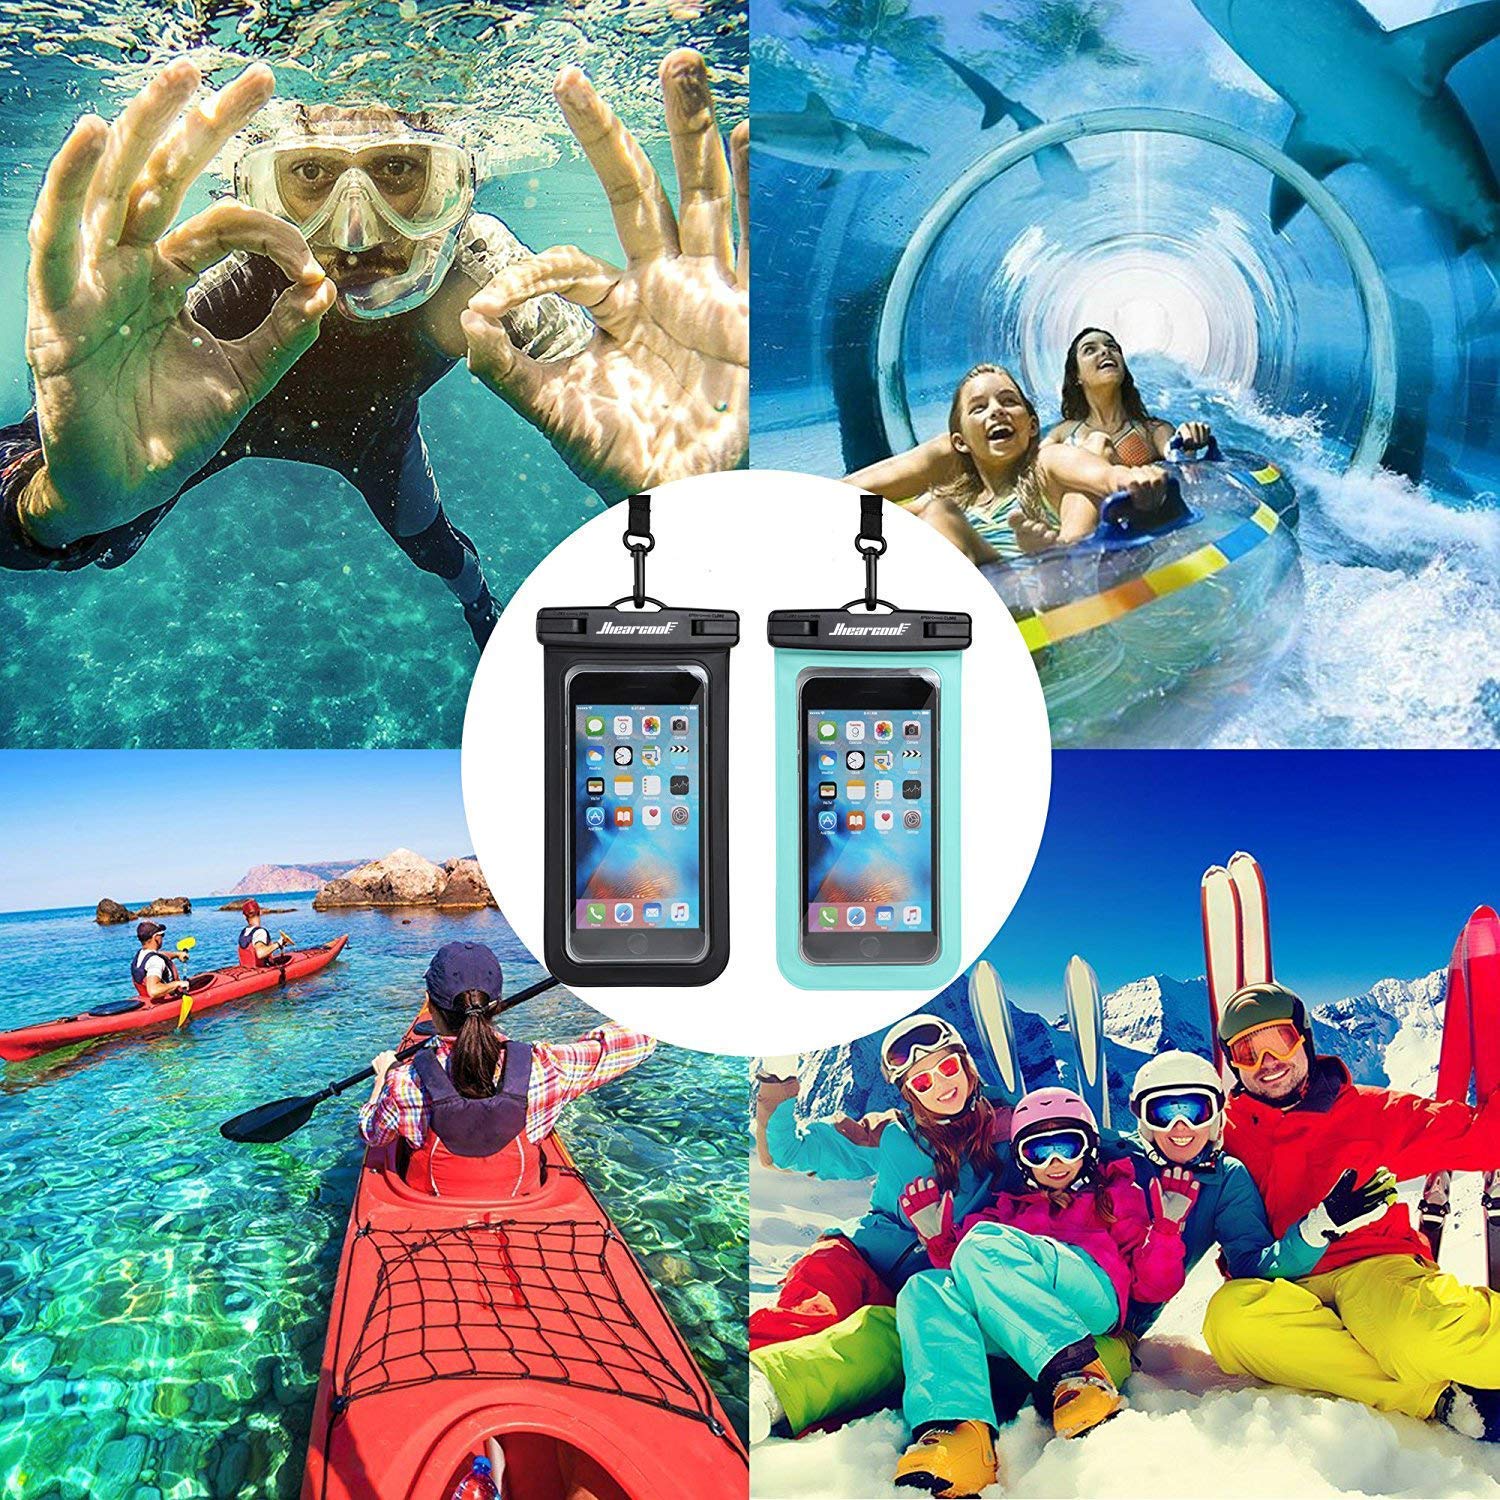 Universal Waterproof Case,Waterproof Phone Pouch Compatible for iPhone 12 Pro 11 Pro Max XS Max XR X 8 7 Samsung Galaxy s10/s9 Google Pixel 2 HTC Up to 7.0